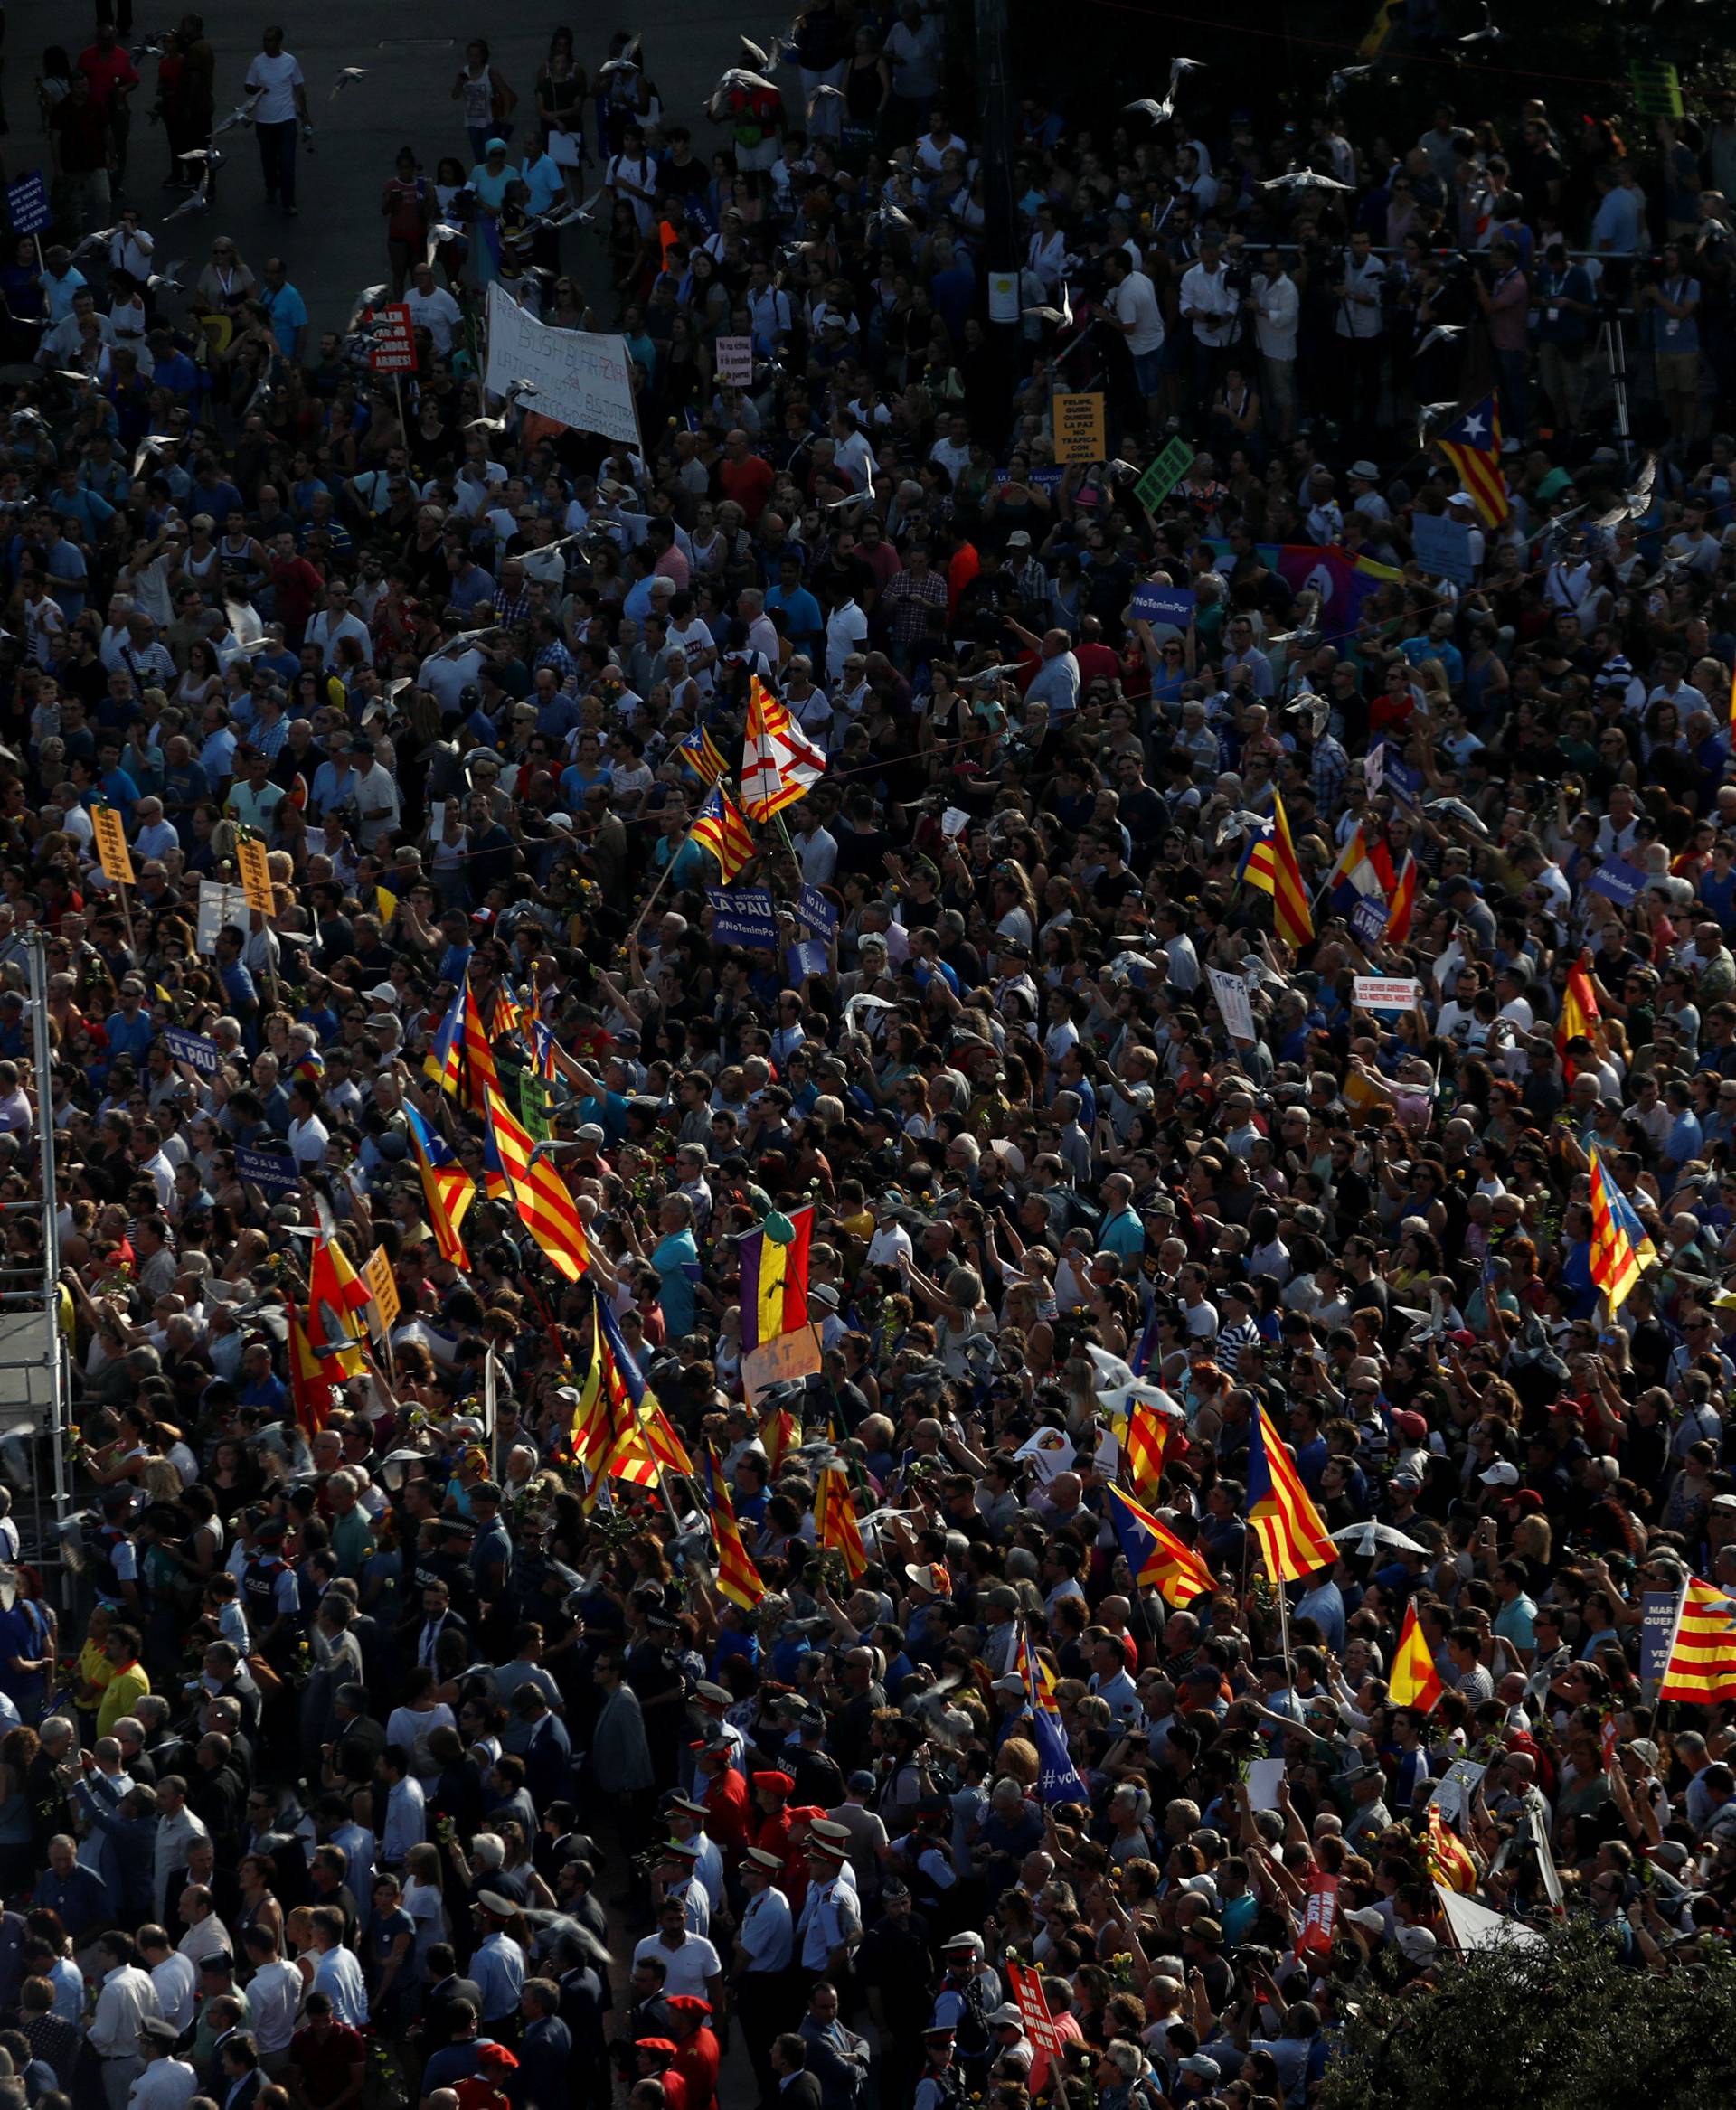 People gather at Plaza Catalunya as they take part in a march of unity after the attacks last week, in Barcelona, Spain